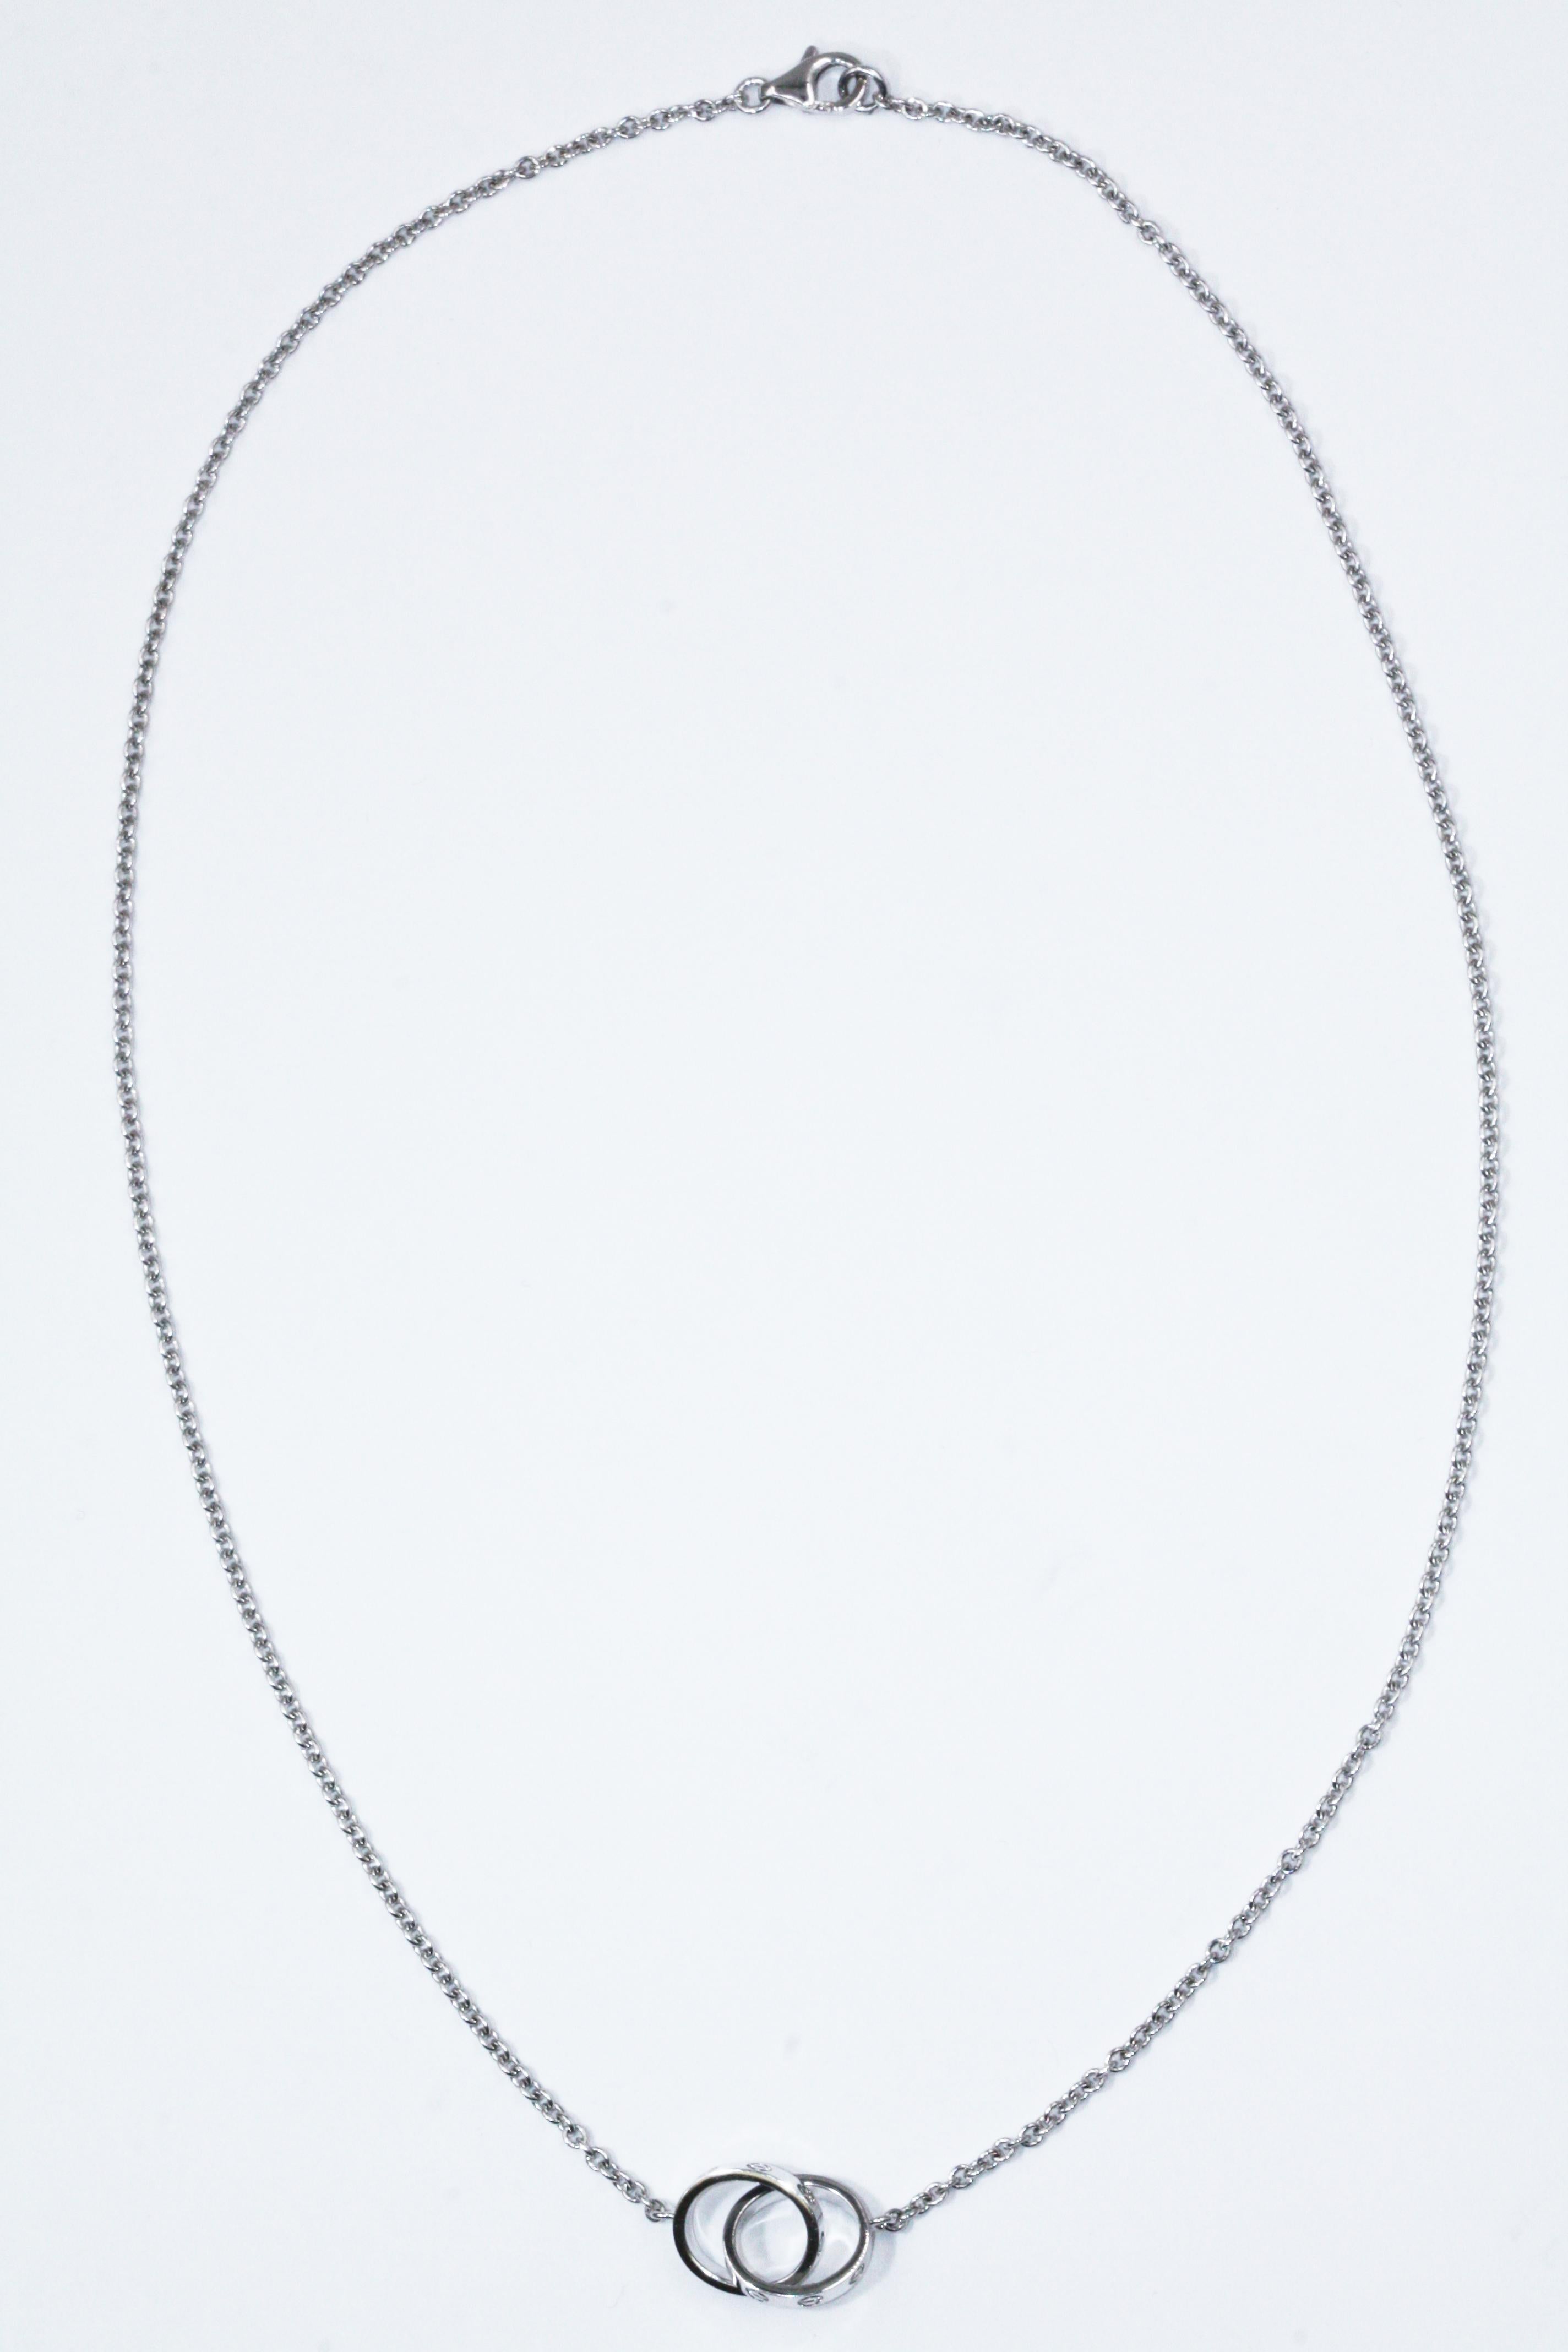 A beautiful Cartier Love necklace made in 18K white gold with two circle. Re: B7212500

Weight: approximate 7.1g
Length: approximate 41cm
This item will come with a box and warranty
Stock #:ctr352